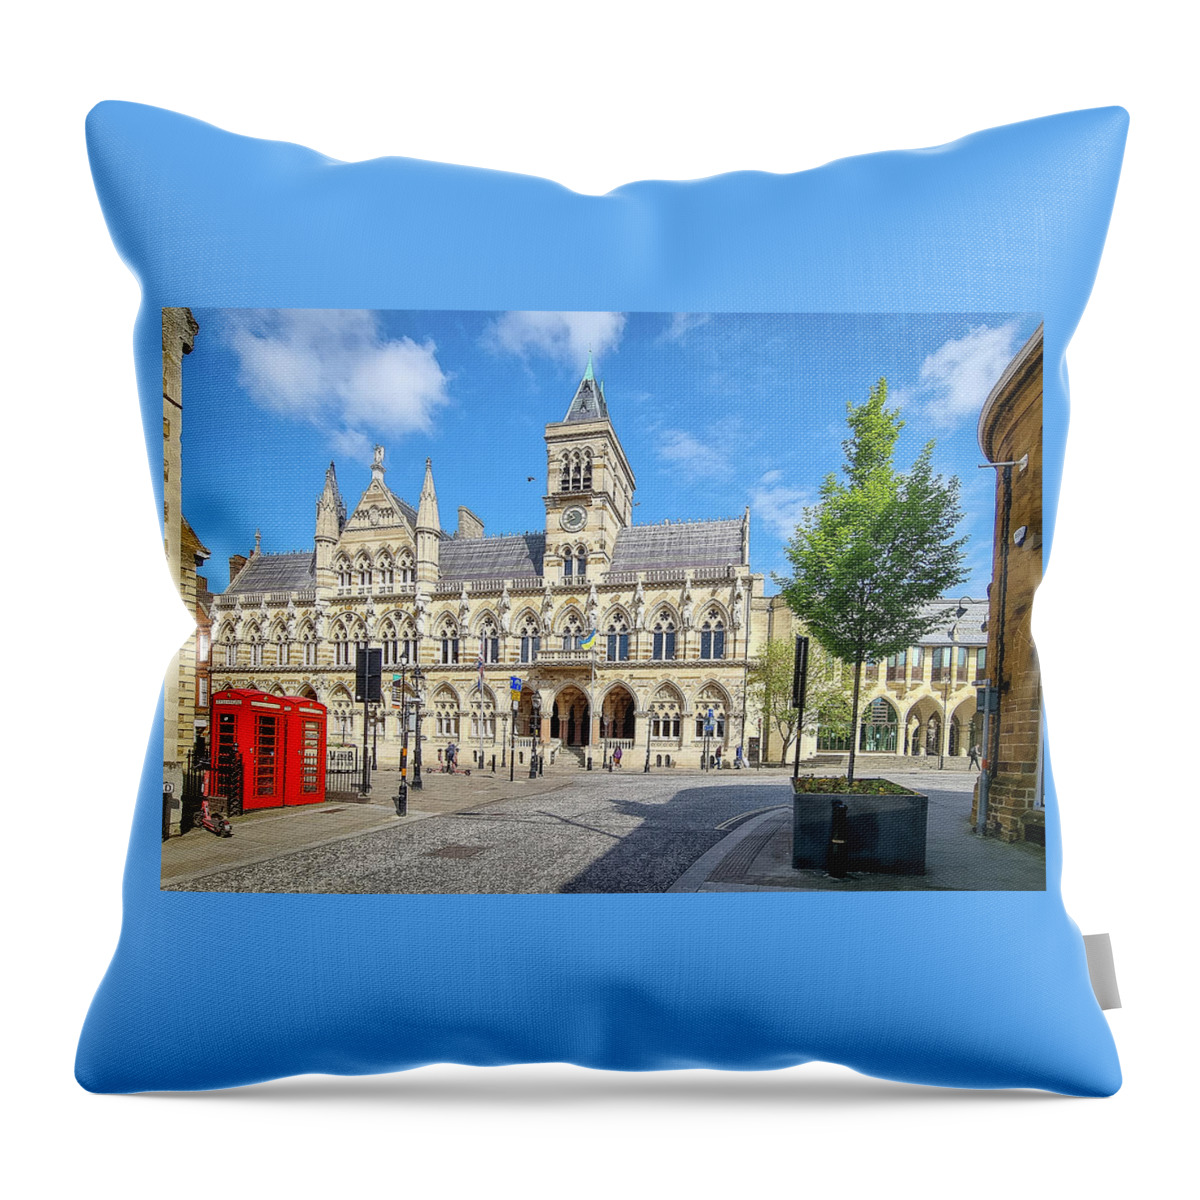  Throw Pillow featuring the photograph Northampton Guildhall #1 by Gordon James